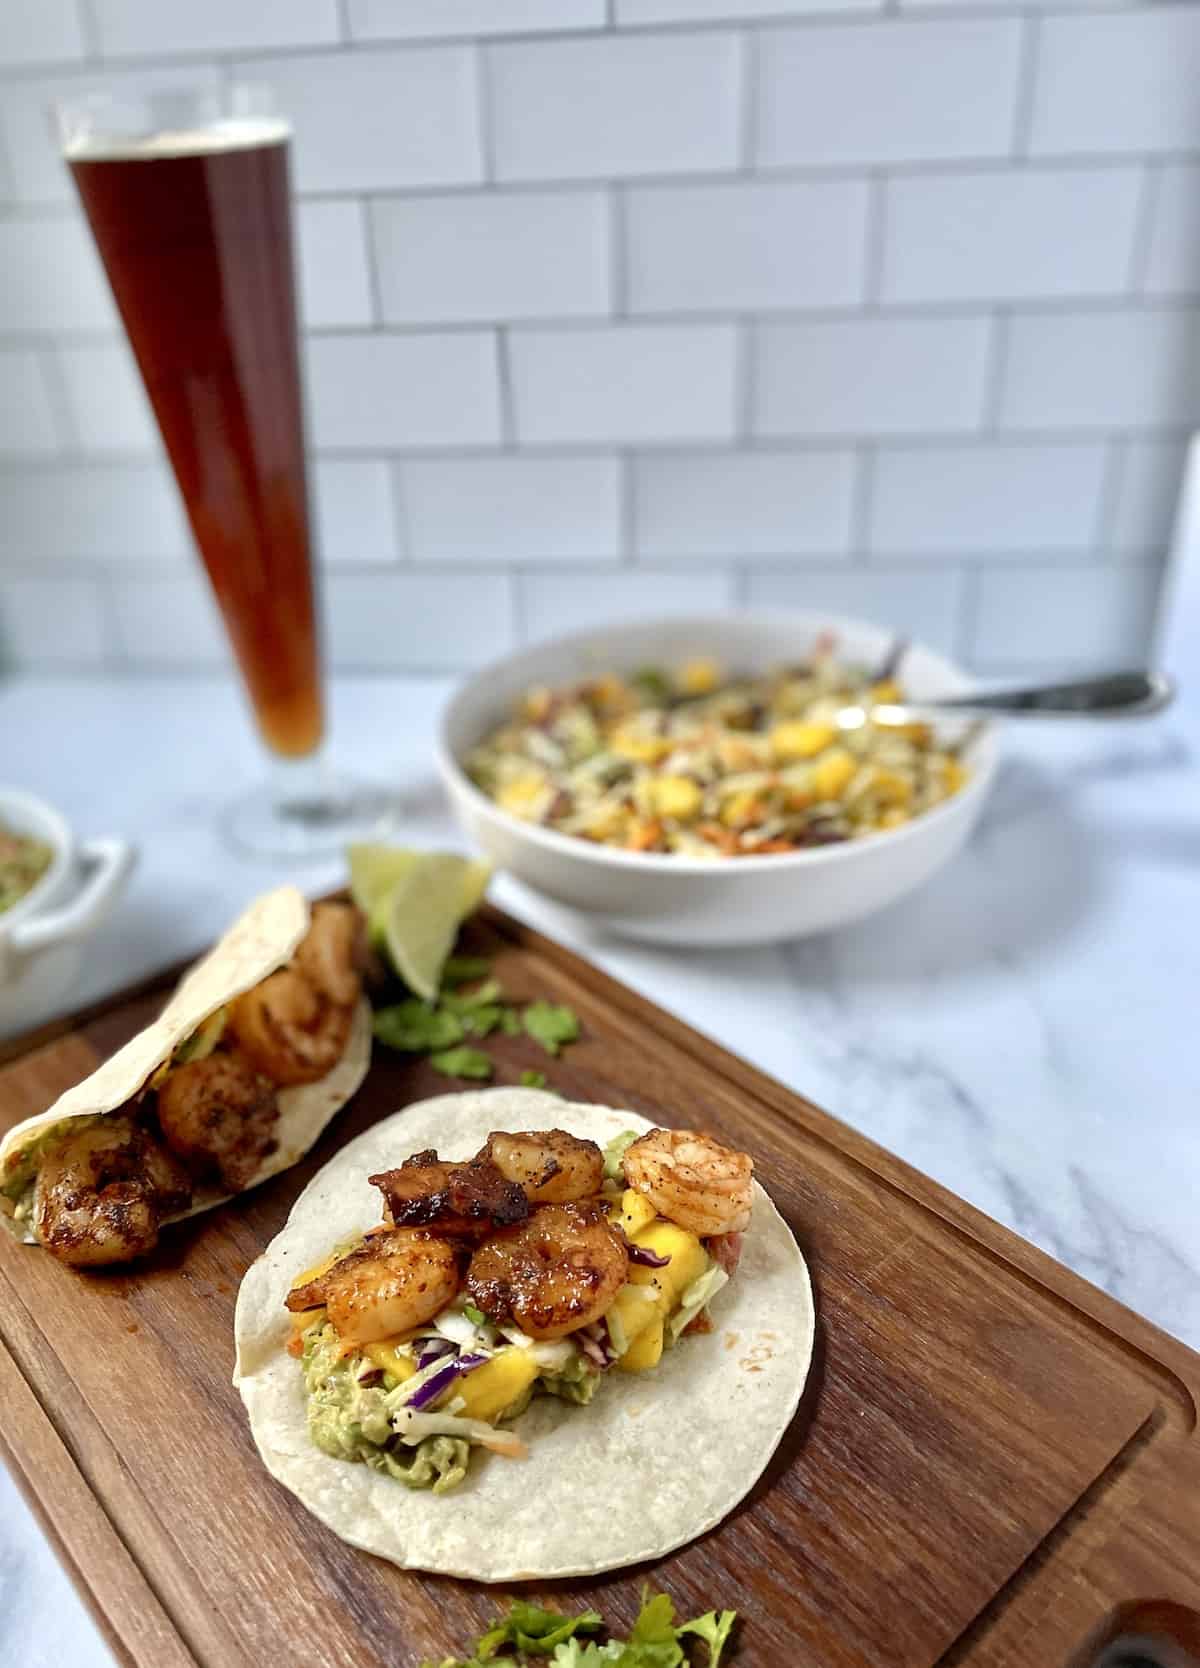 Shrimp and slaw on soft taco on wood cutting board with beer and slaw in background.